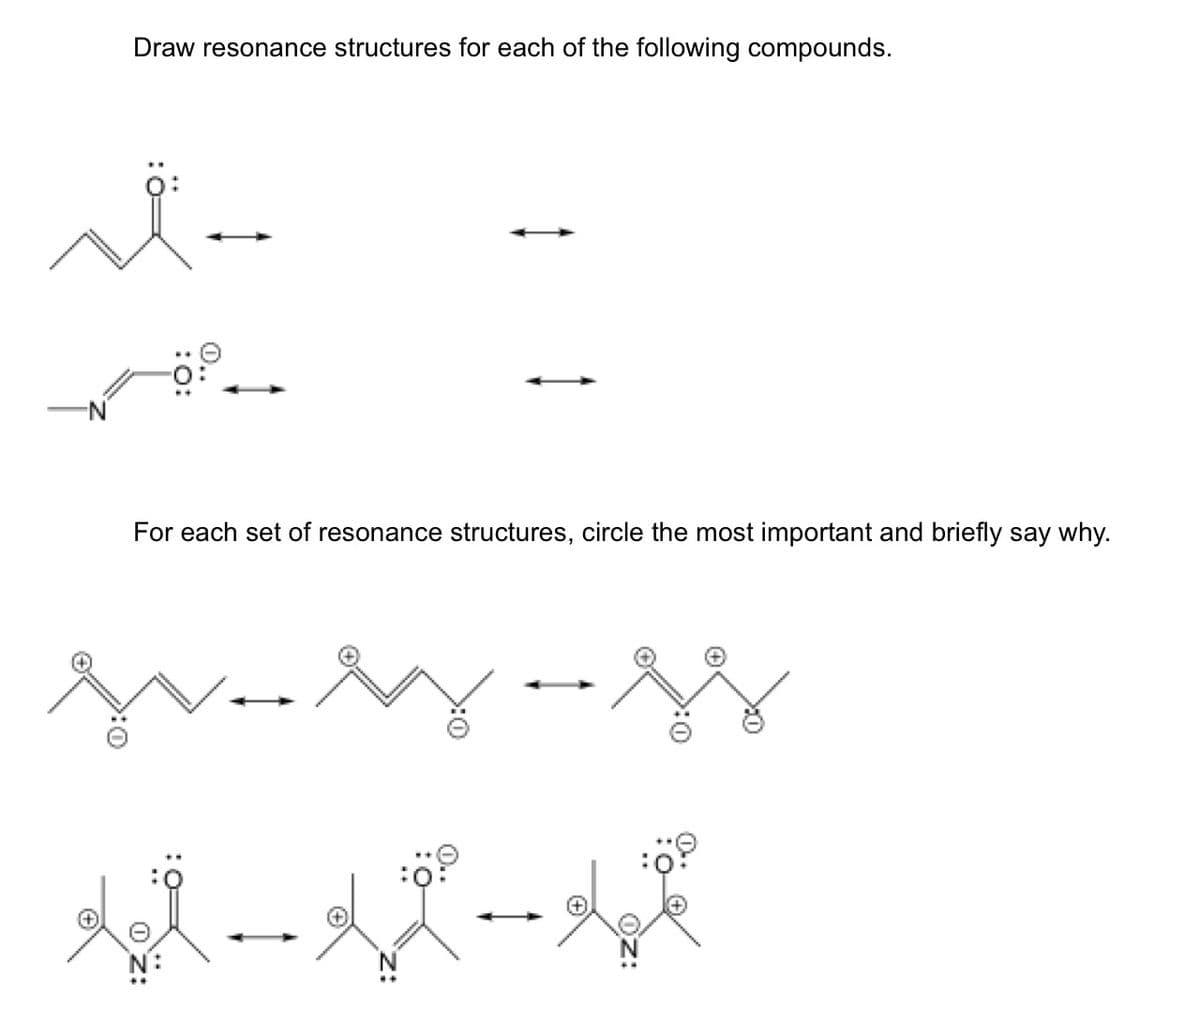 Draw resonance structures for each of the following compounds.
ベー
:0:
For each set of resonance structures, circle the most important and briefly say why.
m.
メズールズ